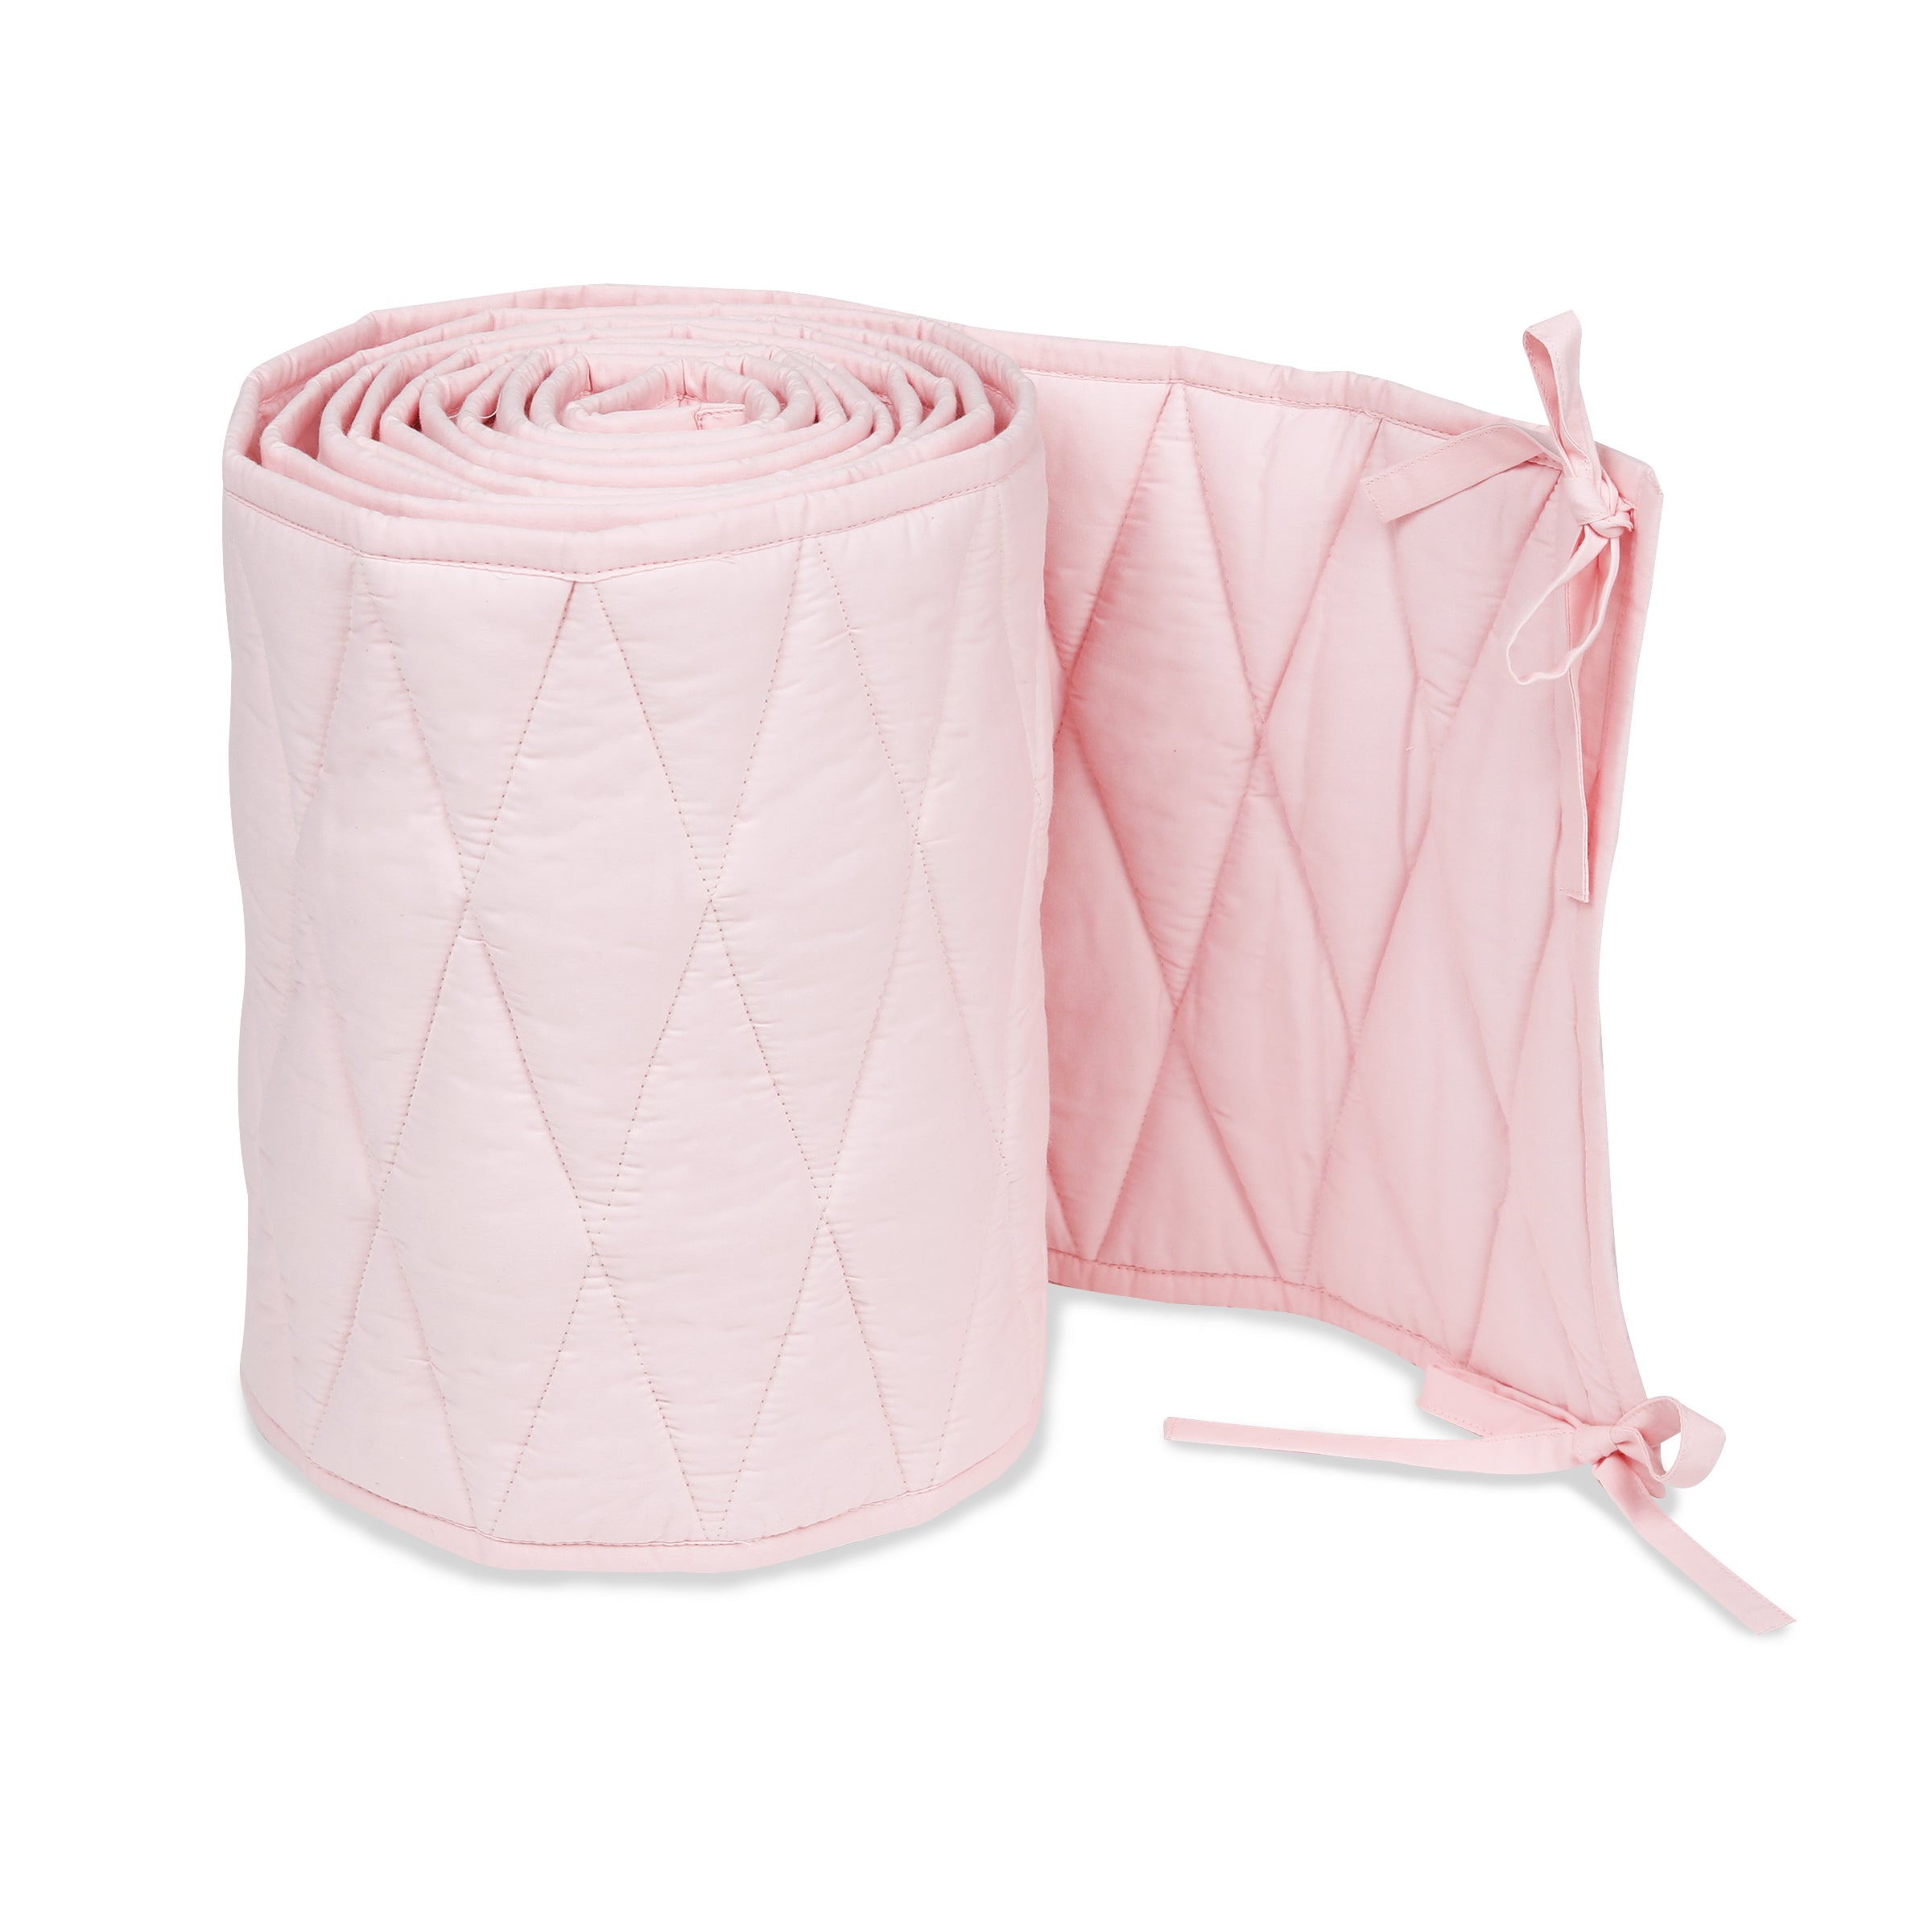 Masilo Cot Bumper With Harlequin Quilting – Pink